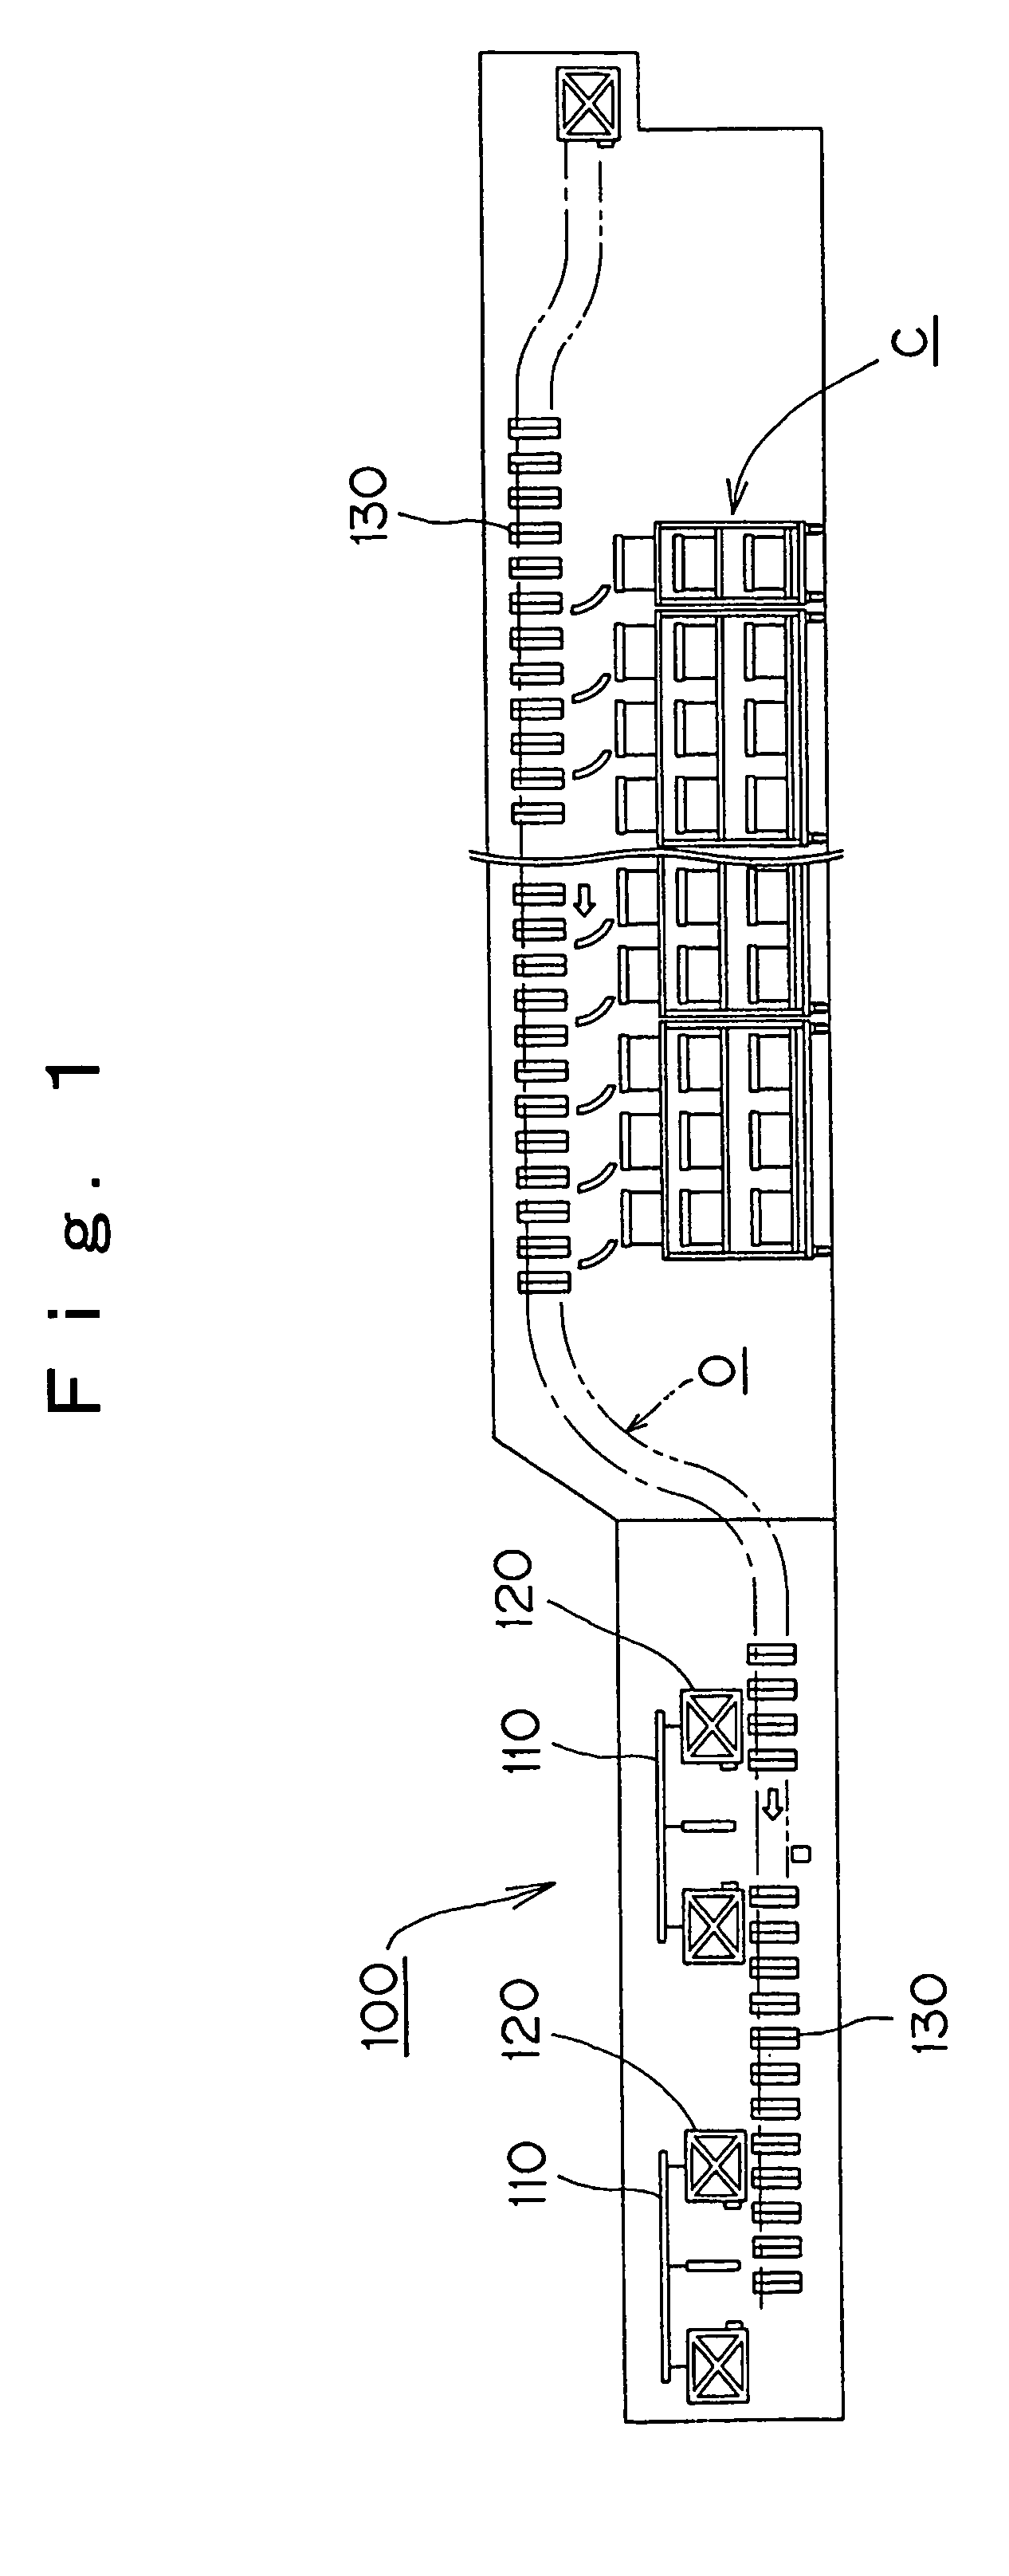 Mail sorting and distributing transfer system